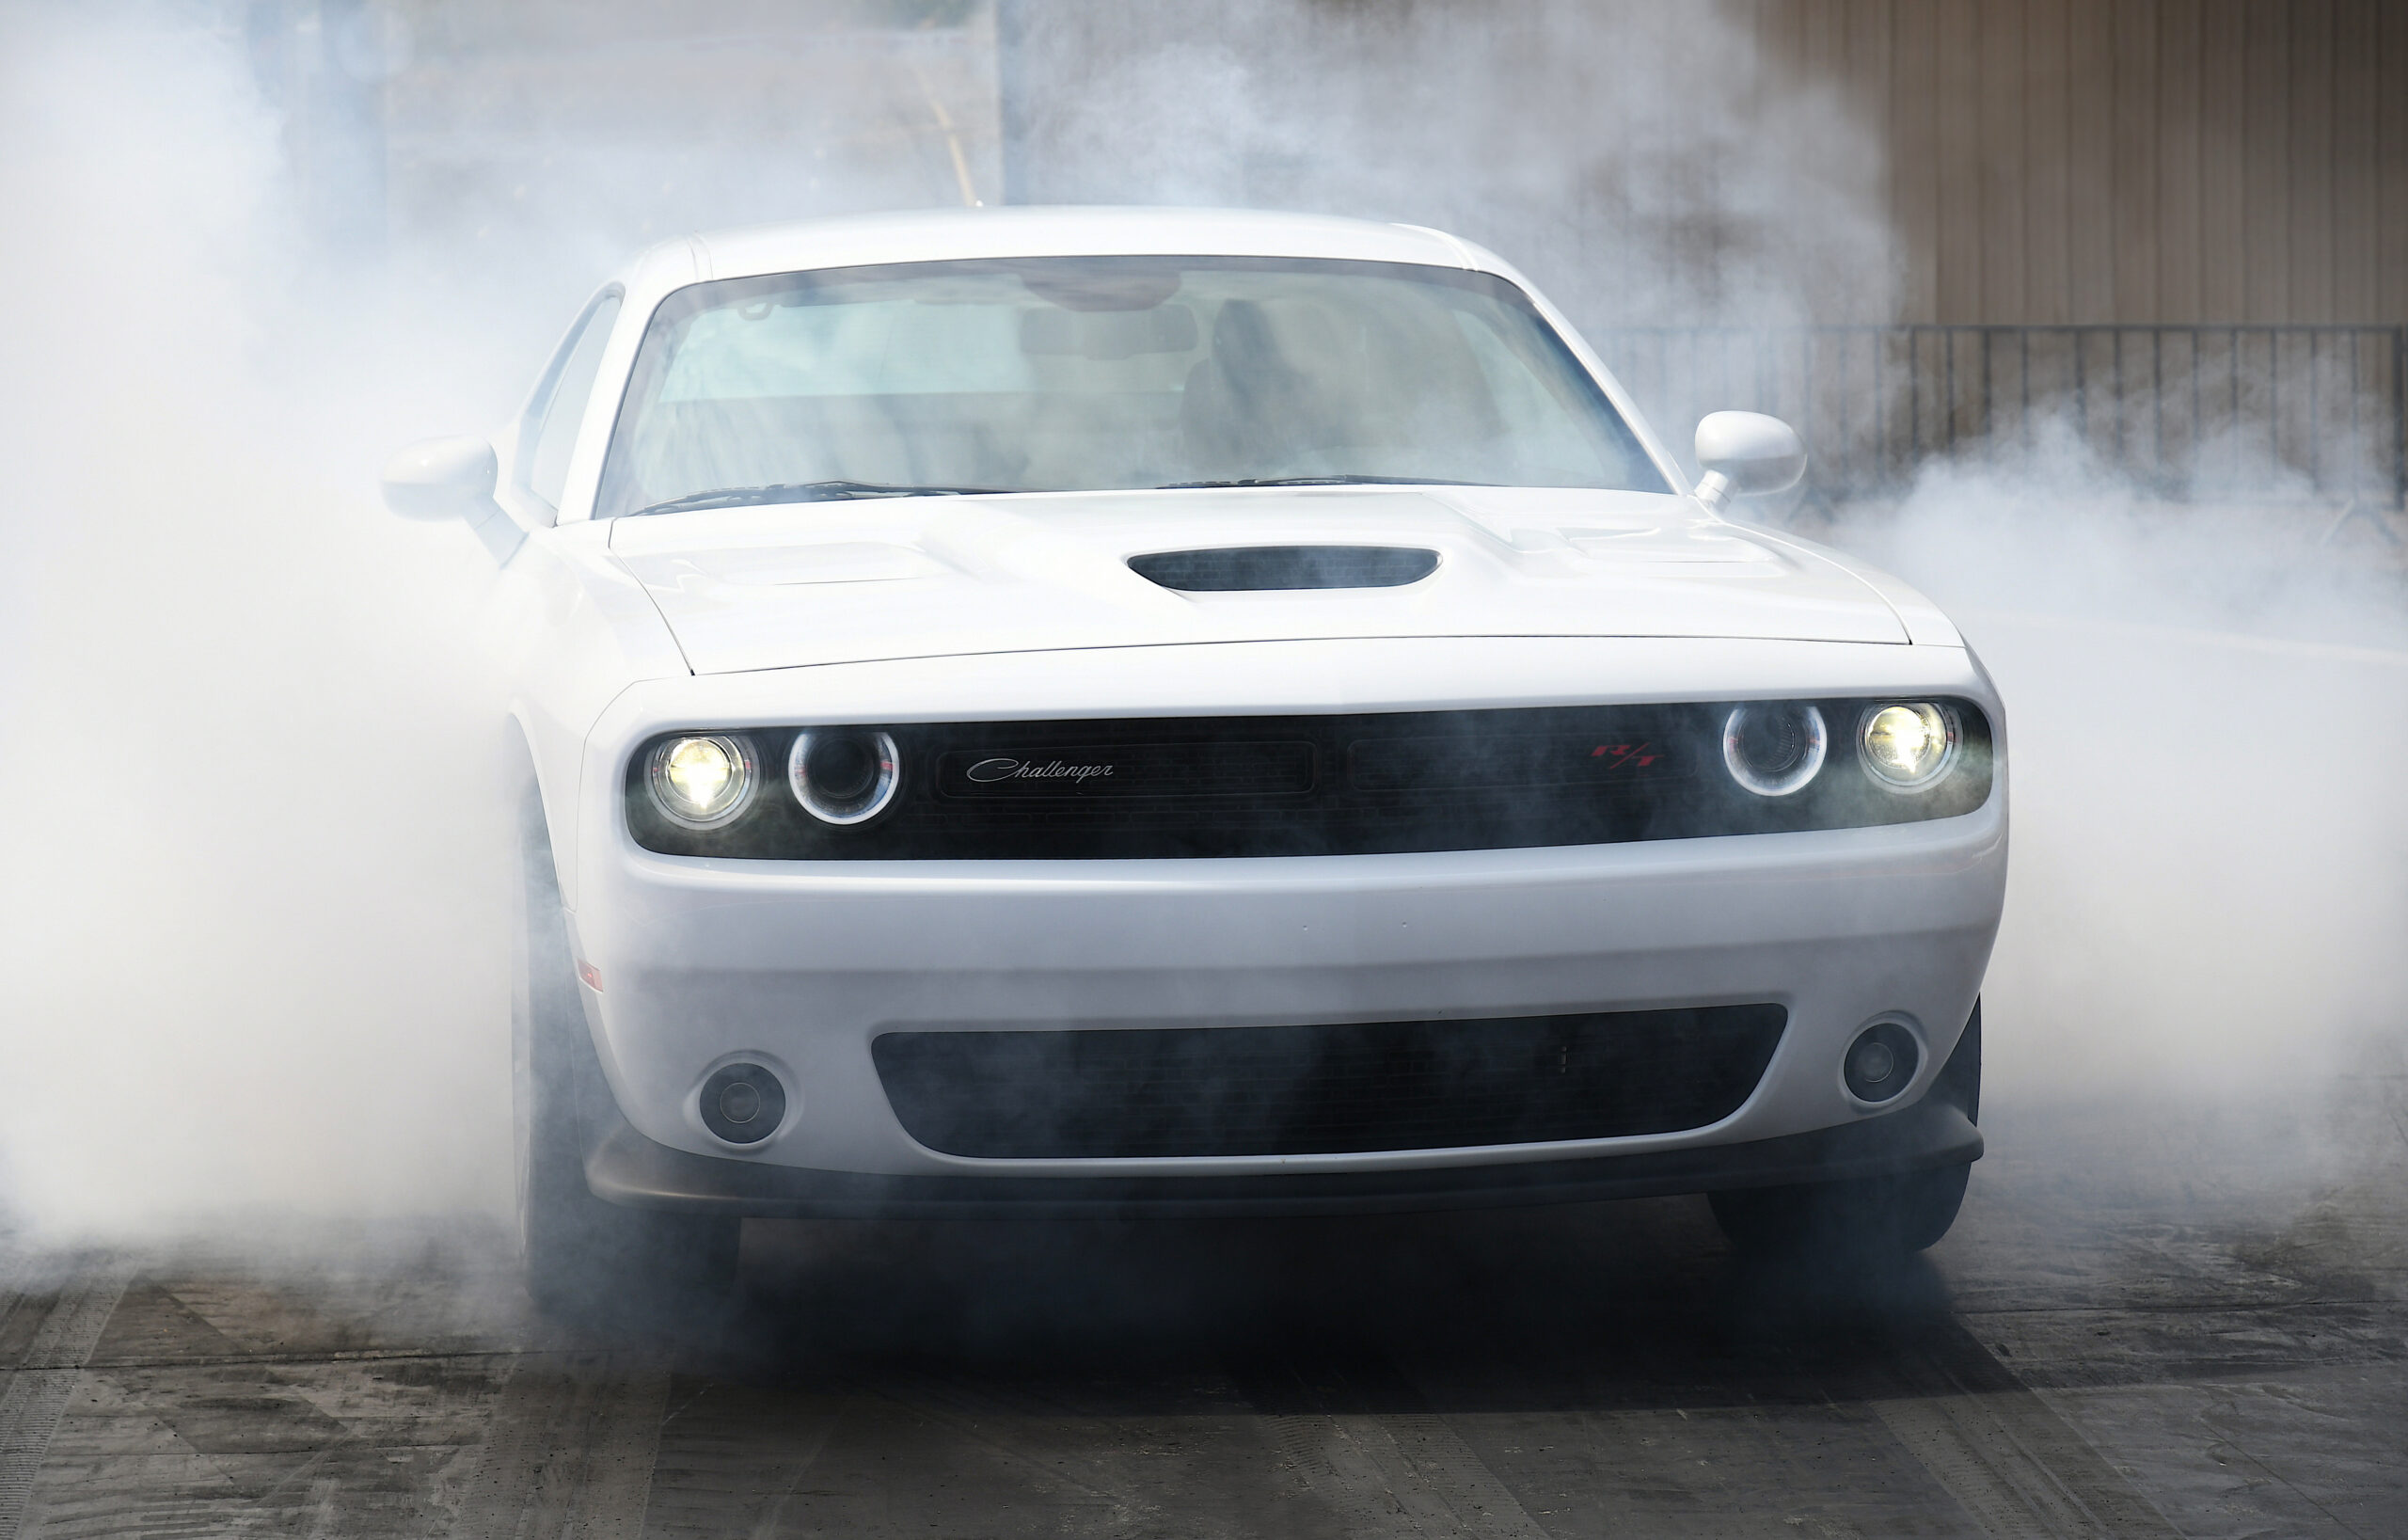 The 2019 Dodge Challenger R/T Scat Pack 1320 is a drag-oriented, street-legal muscle car designed with the grassroots drag racer in mind. Named for the quarter-mile distance (1,320 feet), the Challenger R/T Scat Pack 1320 is powered by the stalwart 392 HEMI® V-8 that delivers 485 horsepower and 475 lb.-ft. of torque. Running the quarter-mile in 11.7 seconds at 115 mph makes the showroom-stock Challenger R/T Scat Pack 1320 the fastest naturally aspirated, street-legal muscle car available.